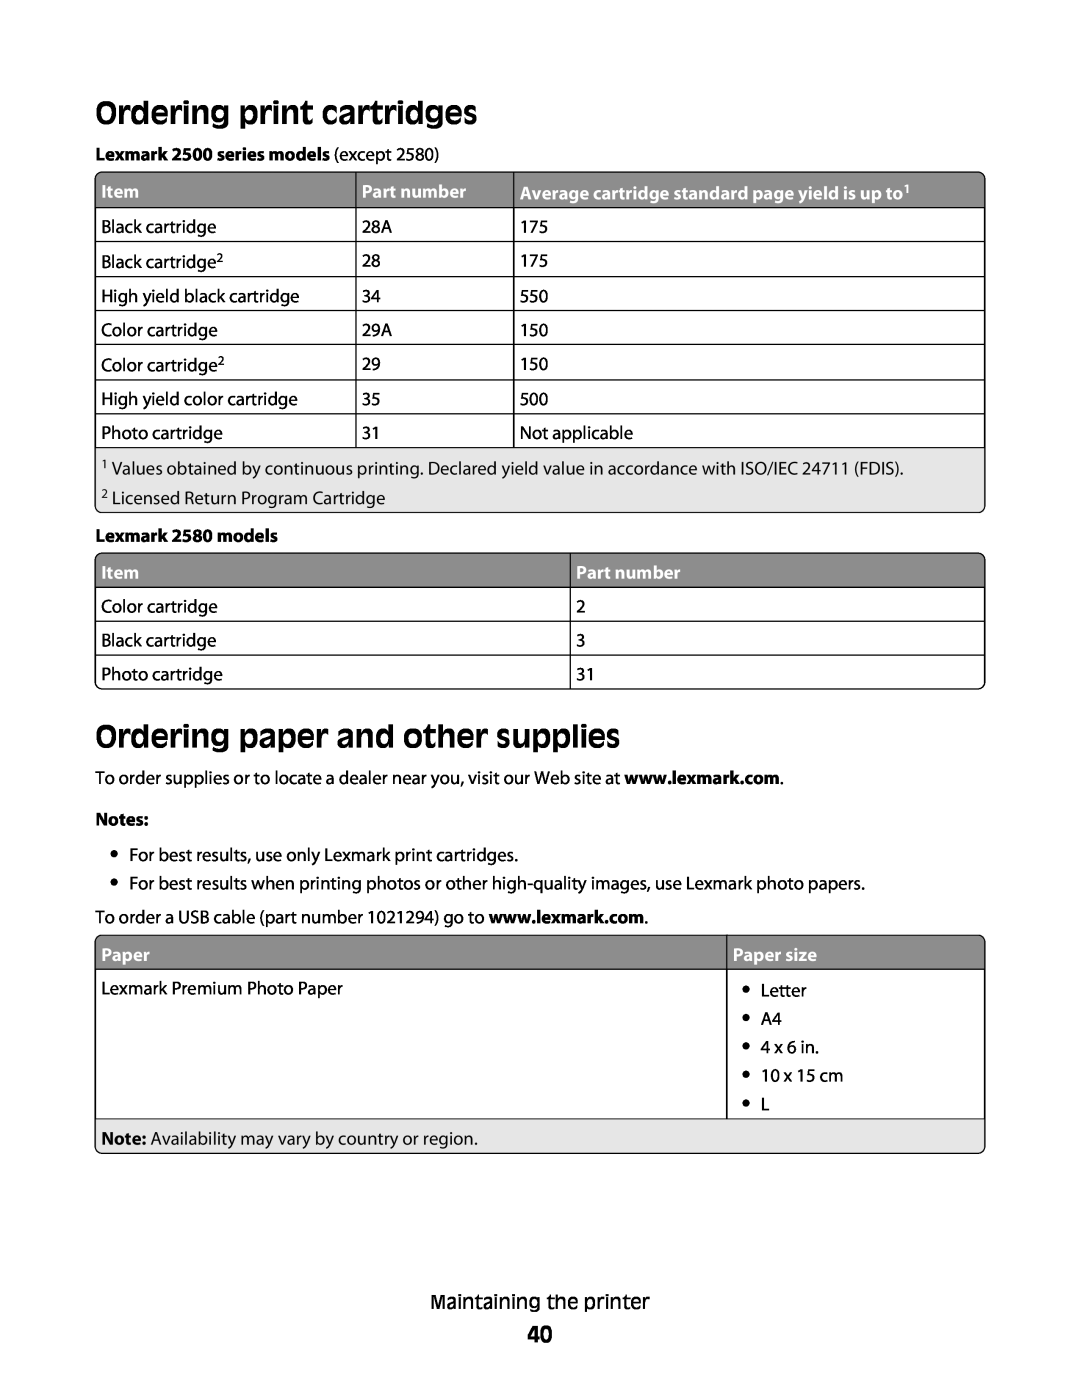 Lexmark 2500 Series Ordering print cartridges, Ordering paper and other supplies, Lexmark 2500 series models except, Paper 